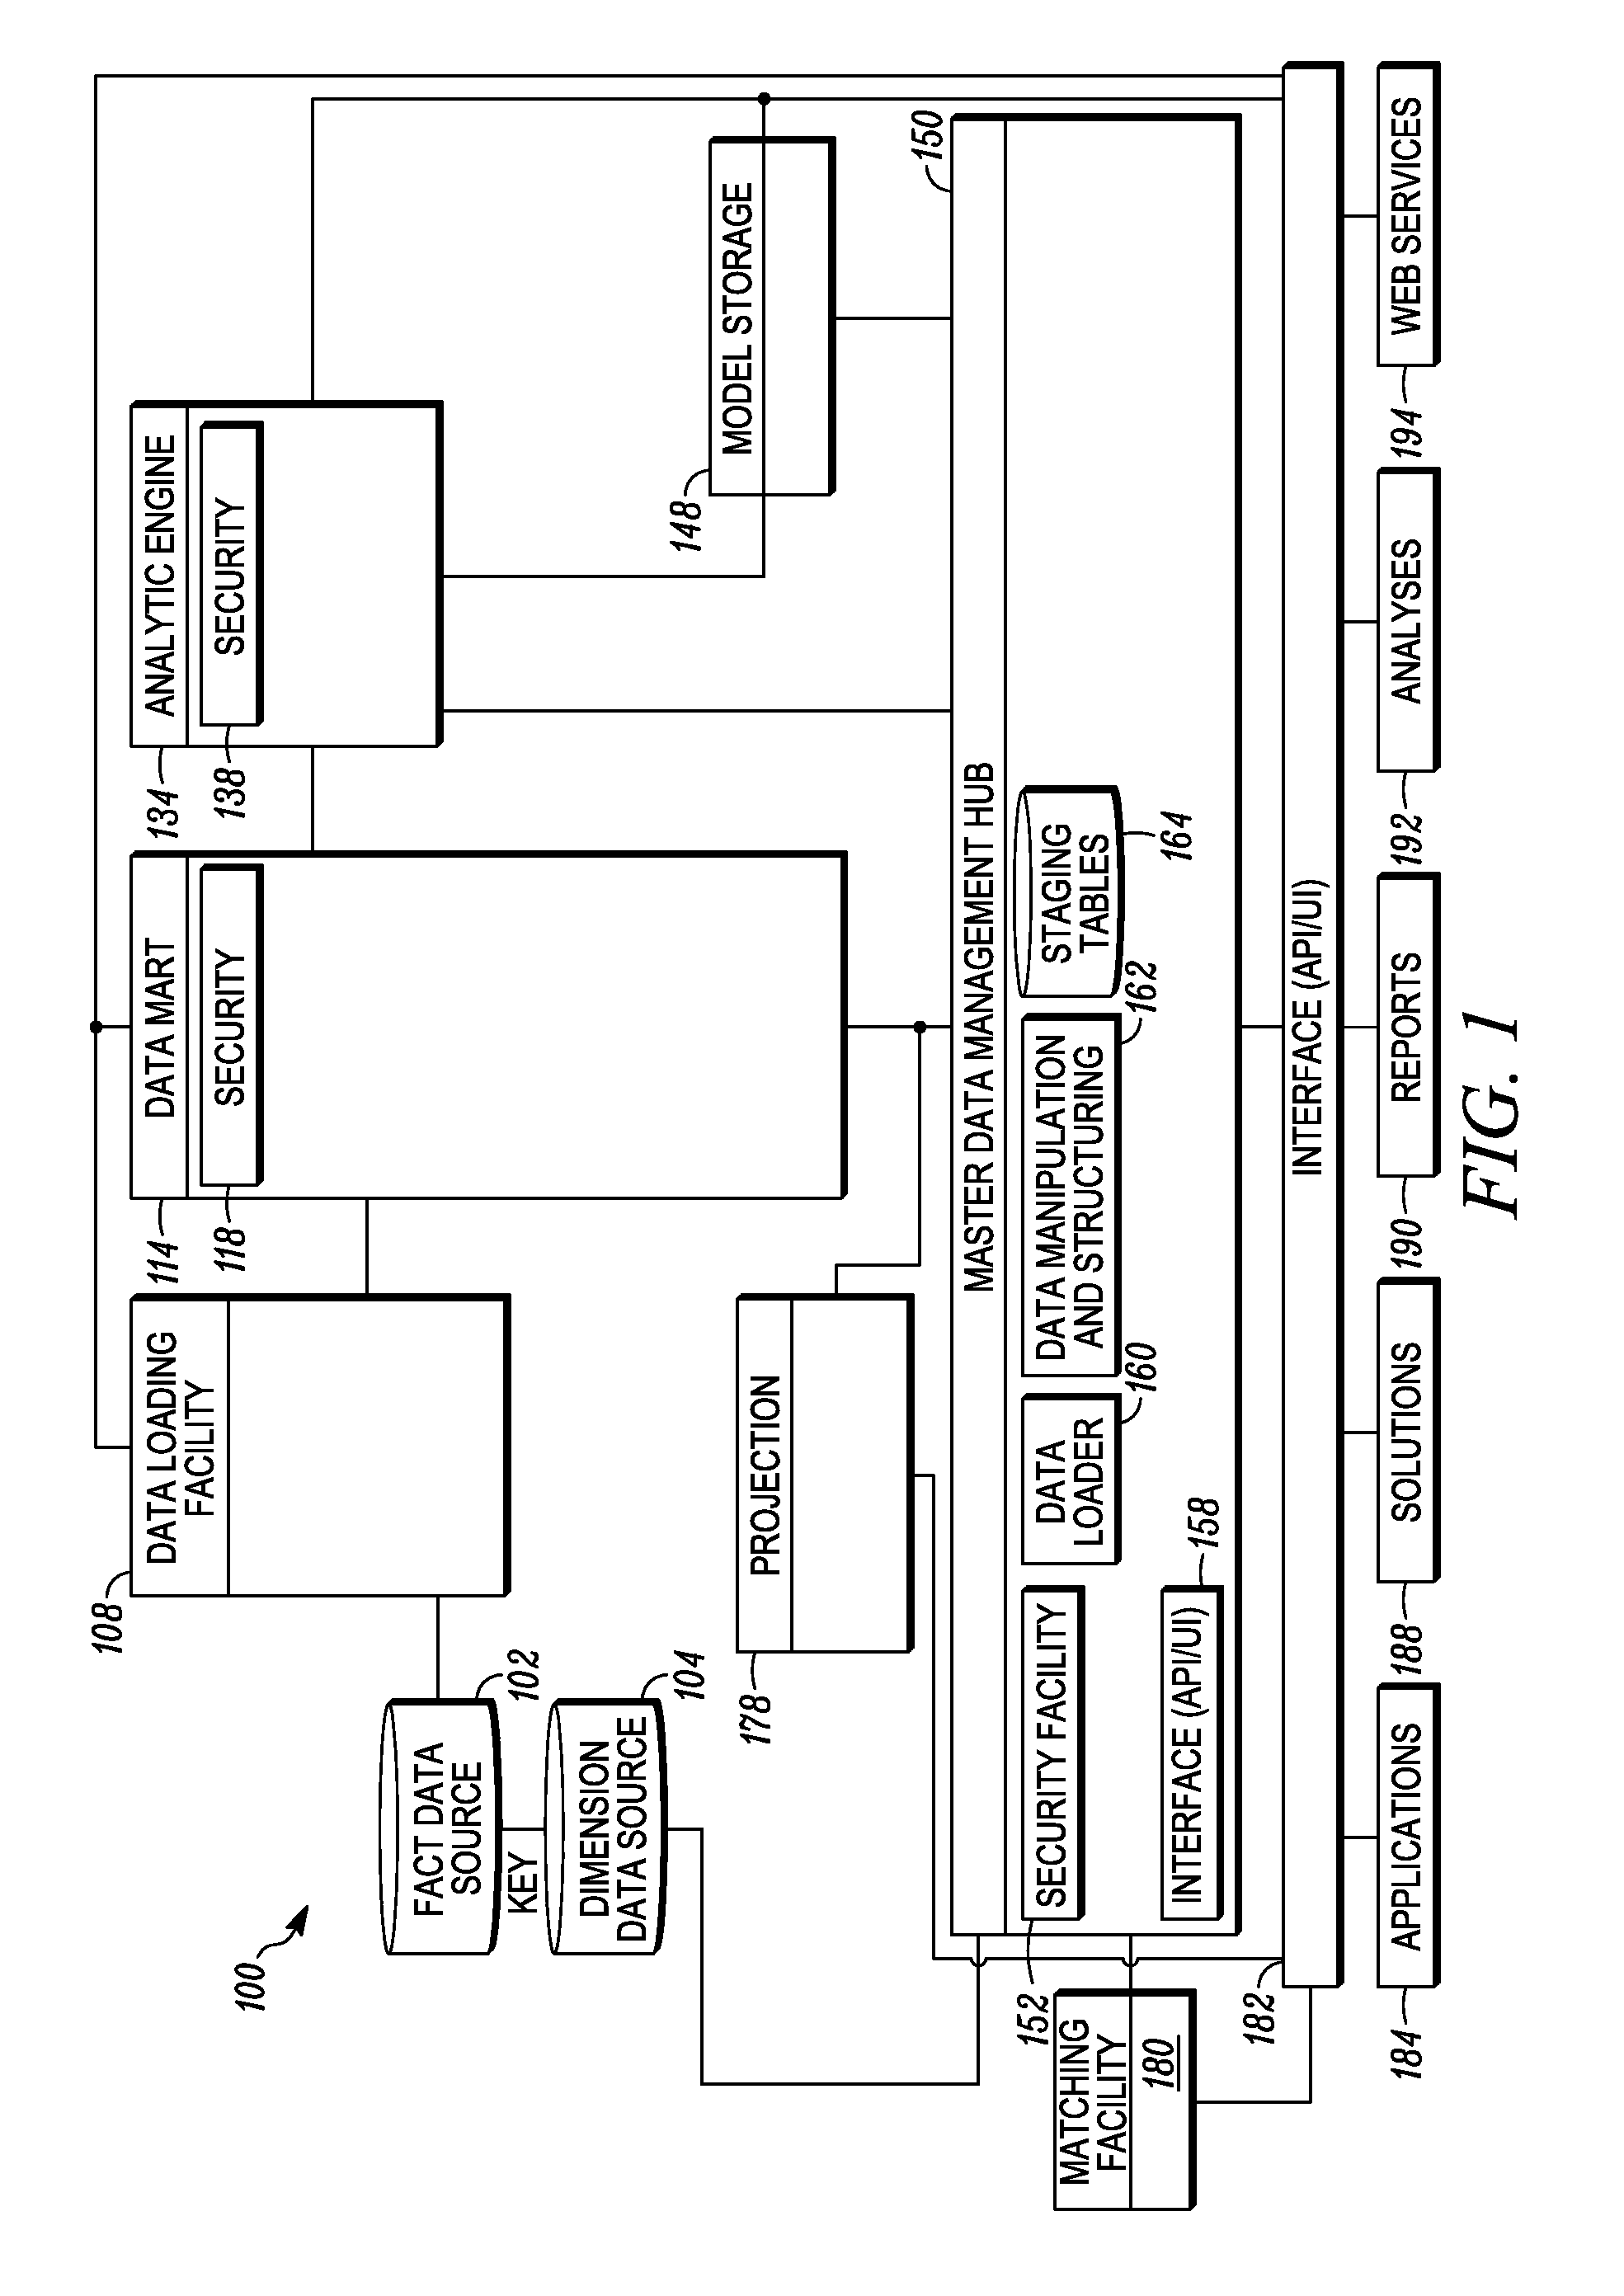 Dimensional compression using an analytic platform